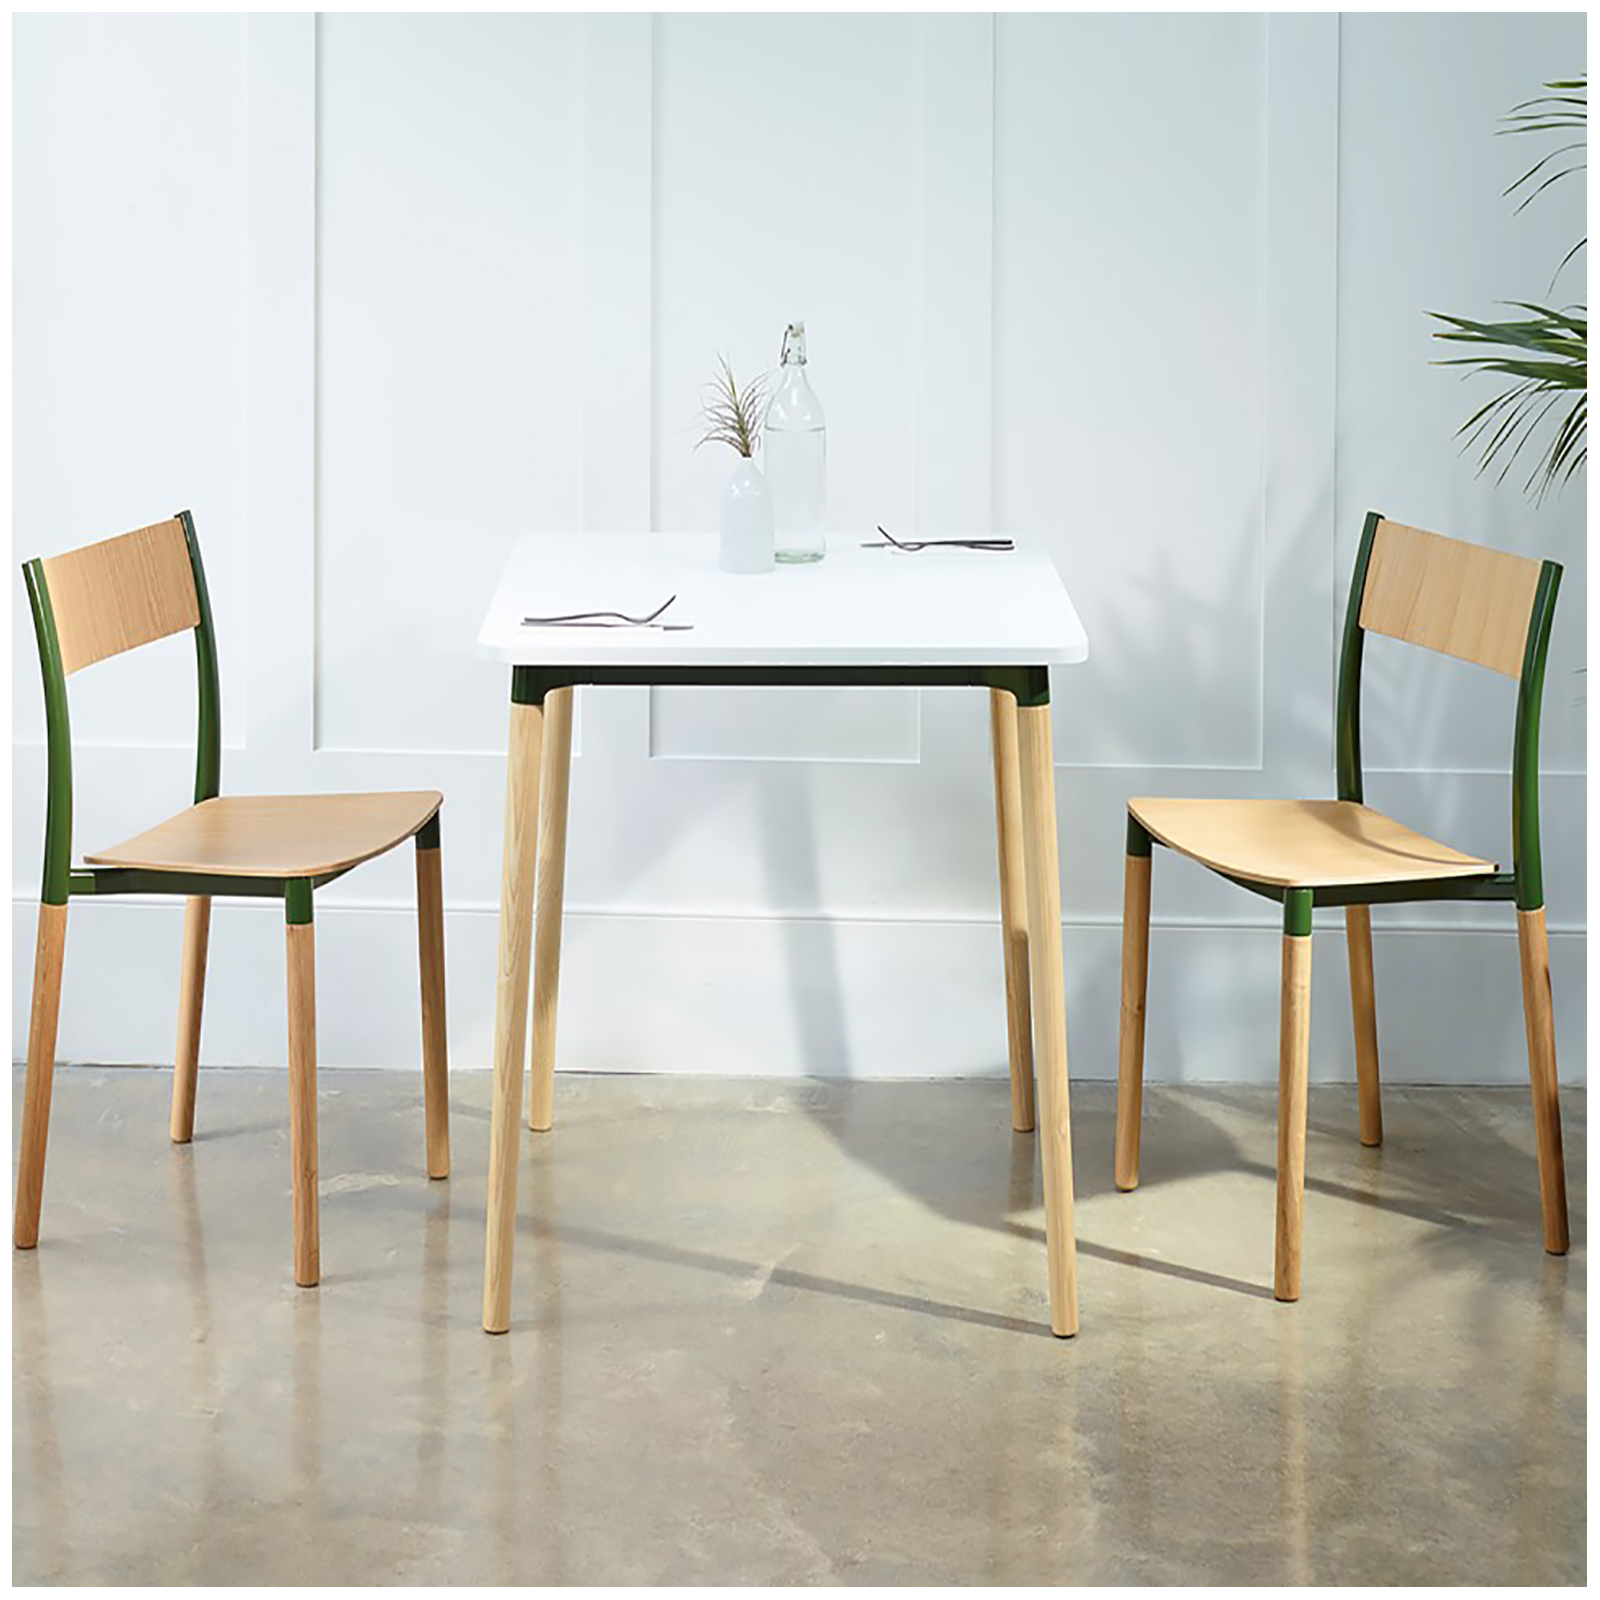 Allermuir Folk Series Tables and chairs